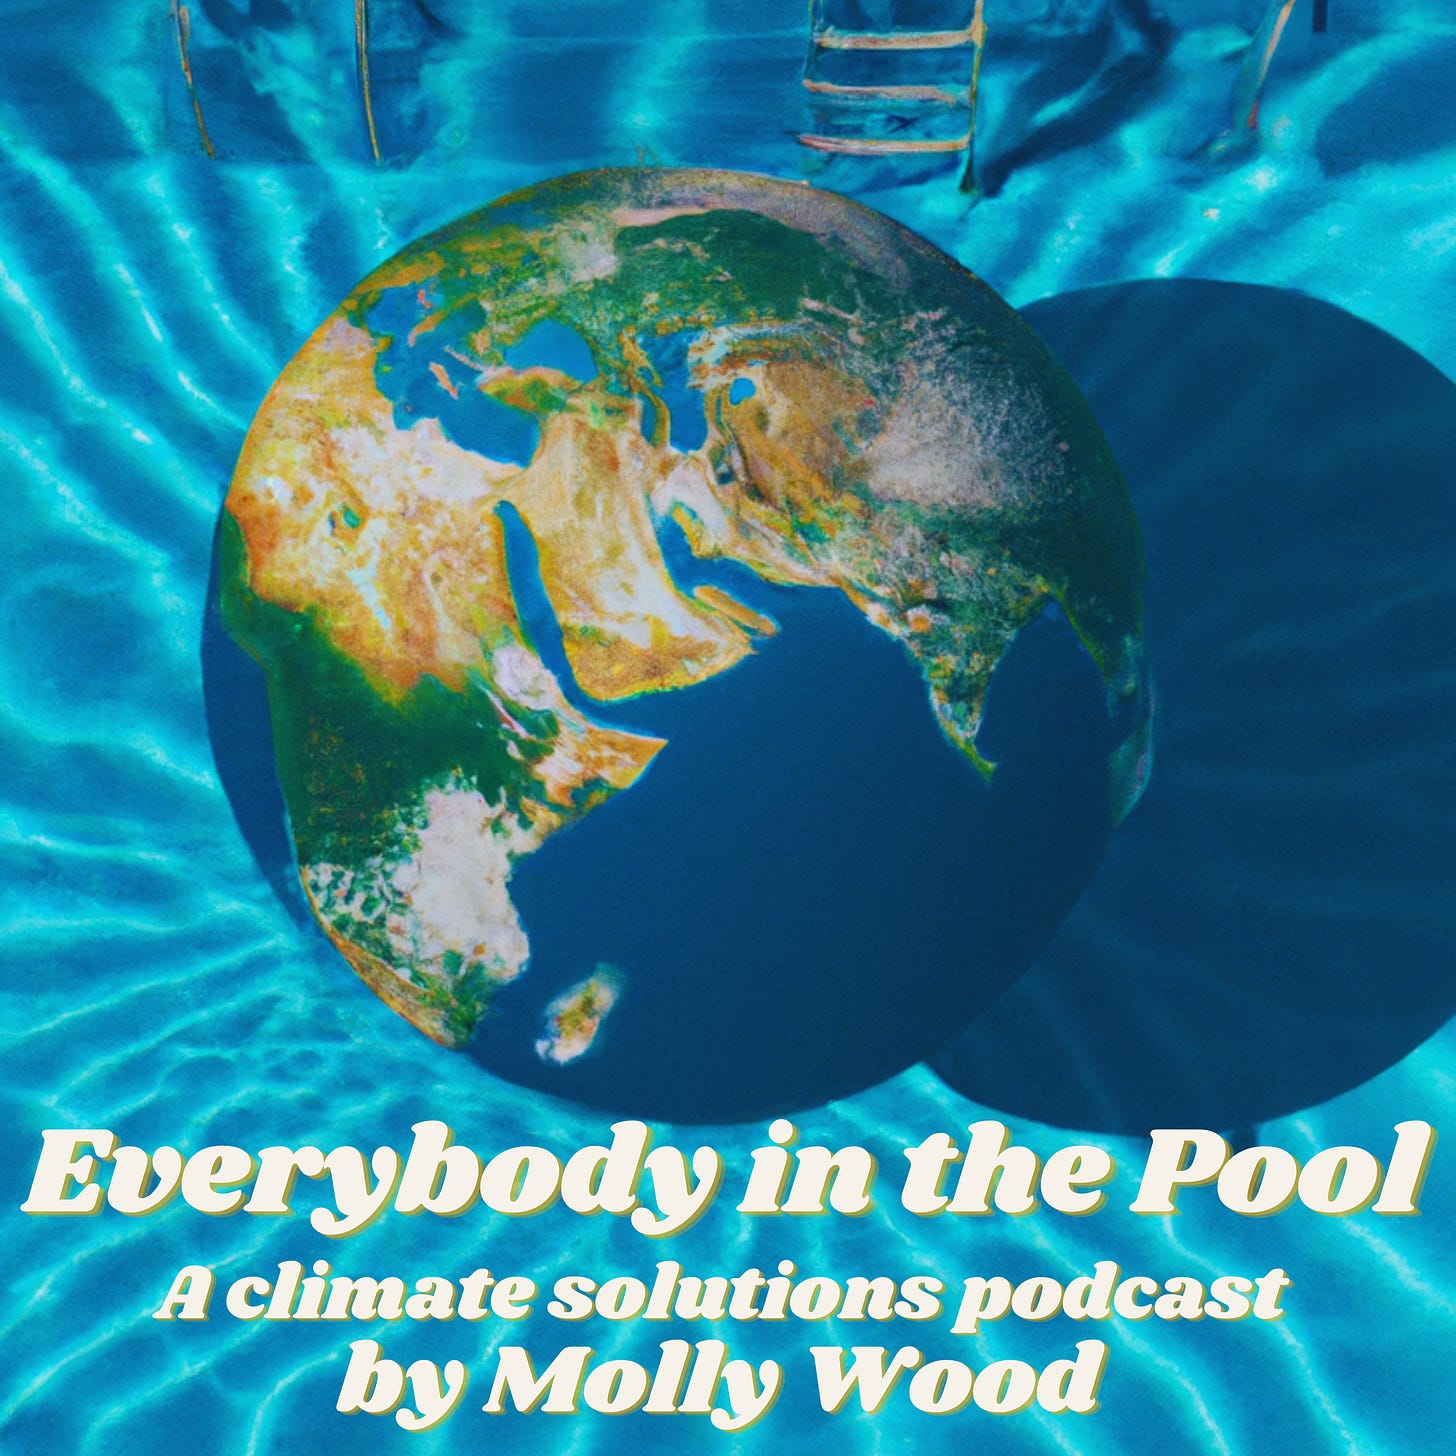 Tile art for my new podcast: Everybody in the Pool!